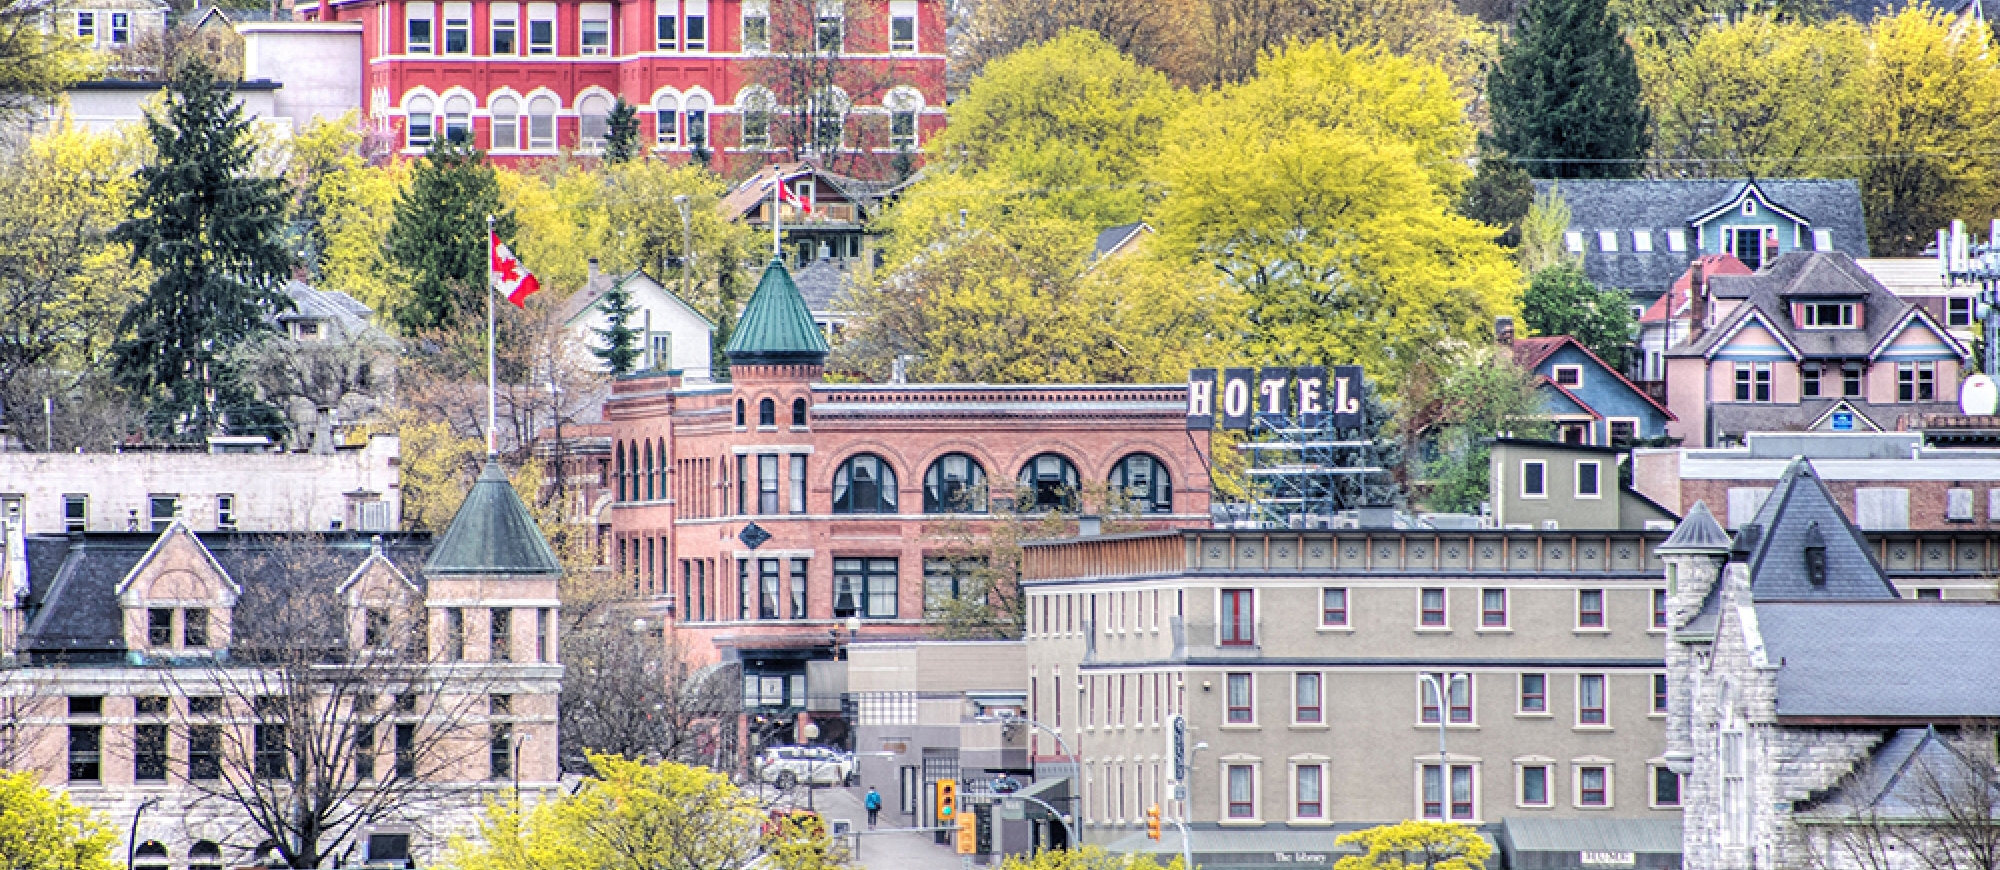 The Hume Hotel and surrounding heritage buildings covered in spring, Nelson, BC